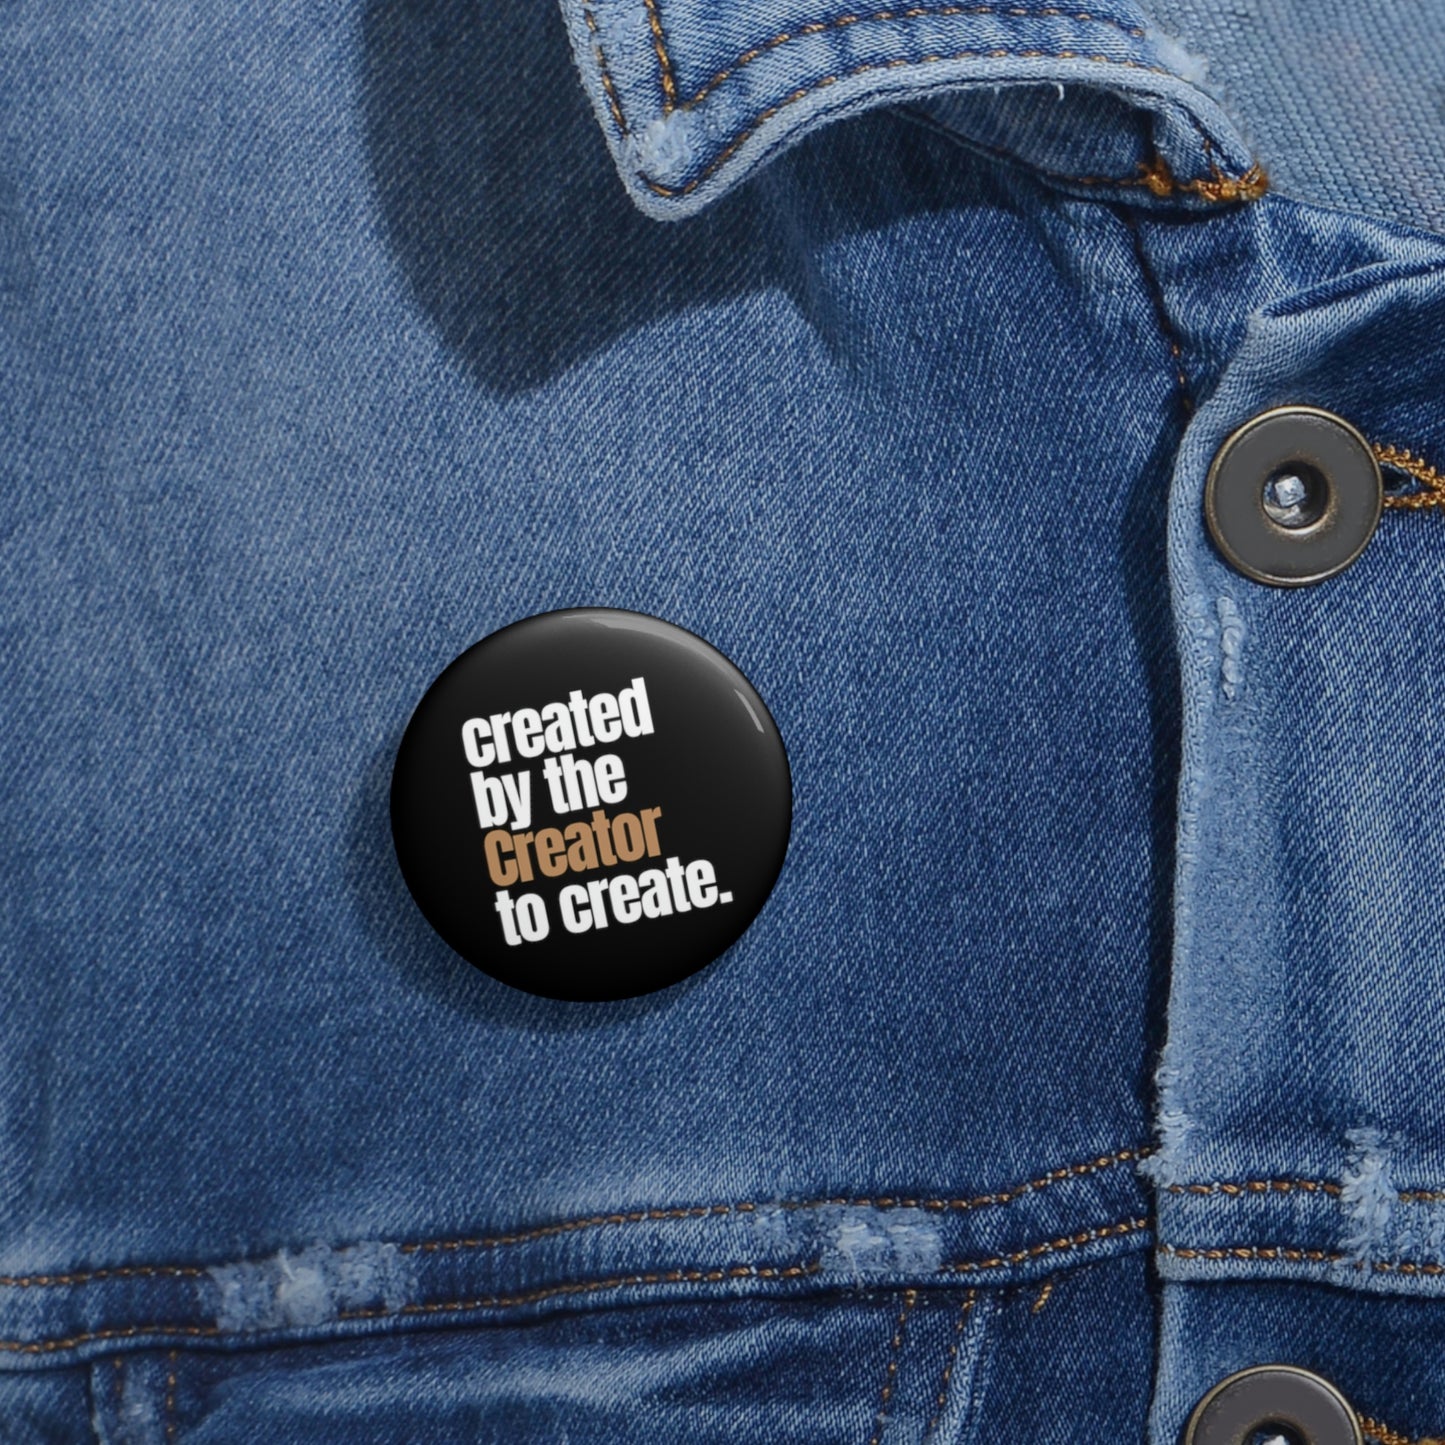 "created by the Creator..." Pin Button - black